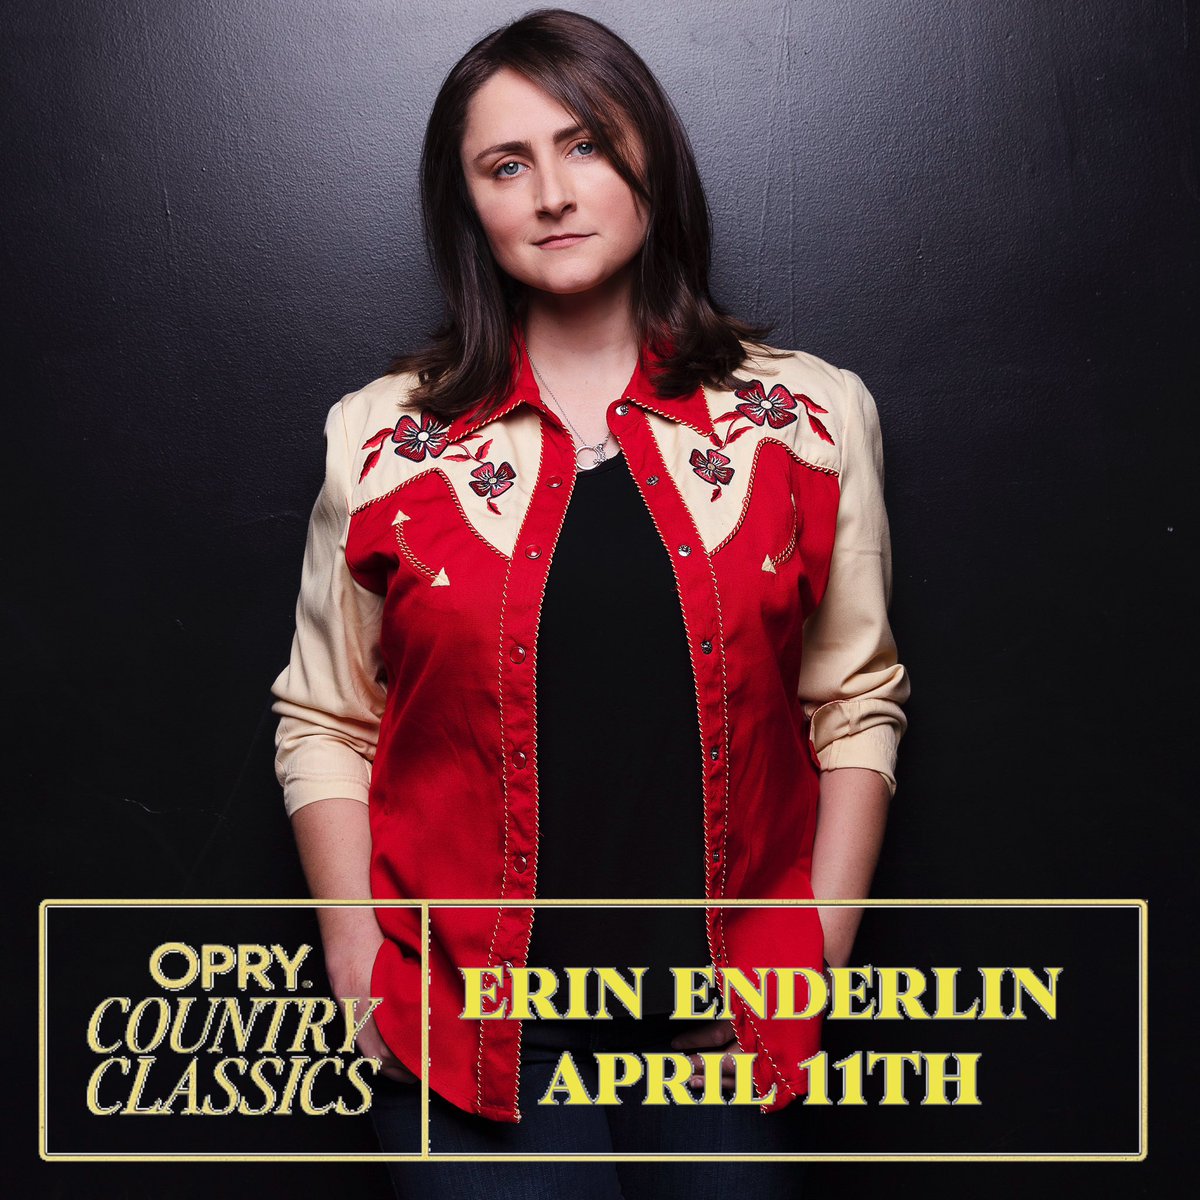 Y’all know how much I love the @opry and I’ll be heading back April 11th for Opry Country Classics at the Opry House✨ I’ll join @gatlinbrothers @SawyerBrownBand @Malpassbrothers and Charlie McCoy with more to be announced 🖤 Wonder what songs I’ll play 🤔 any guesses??